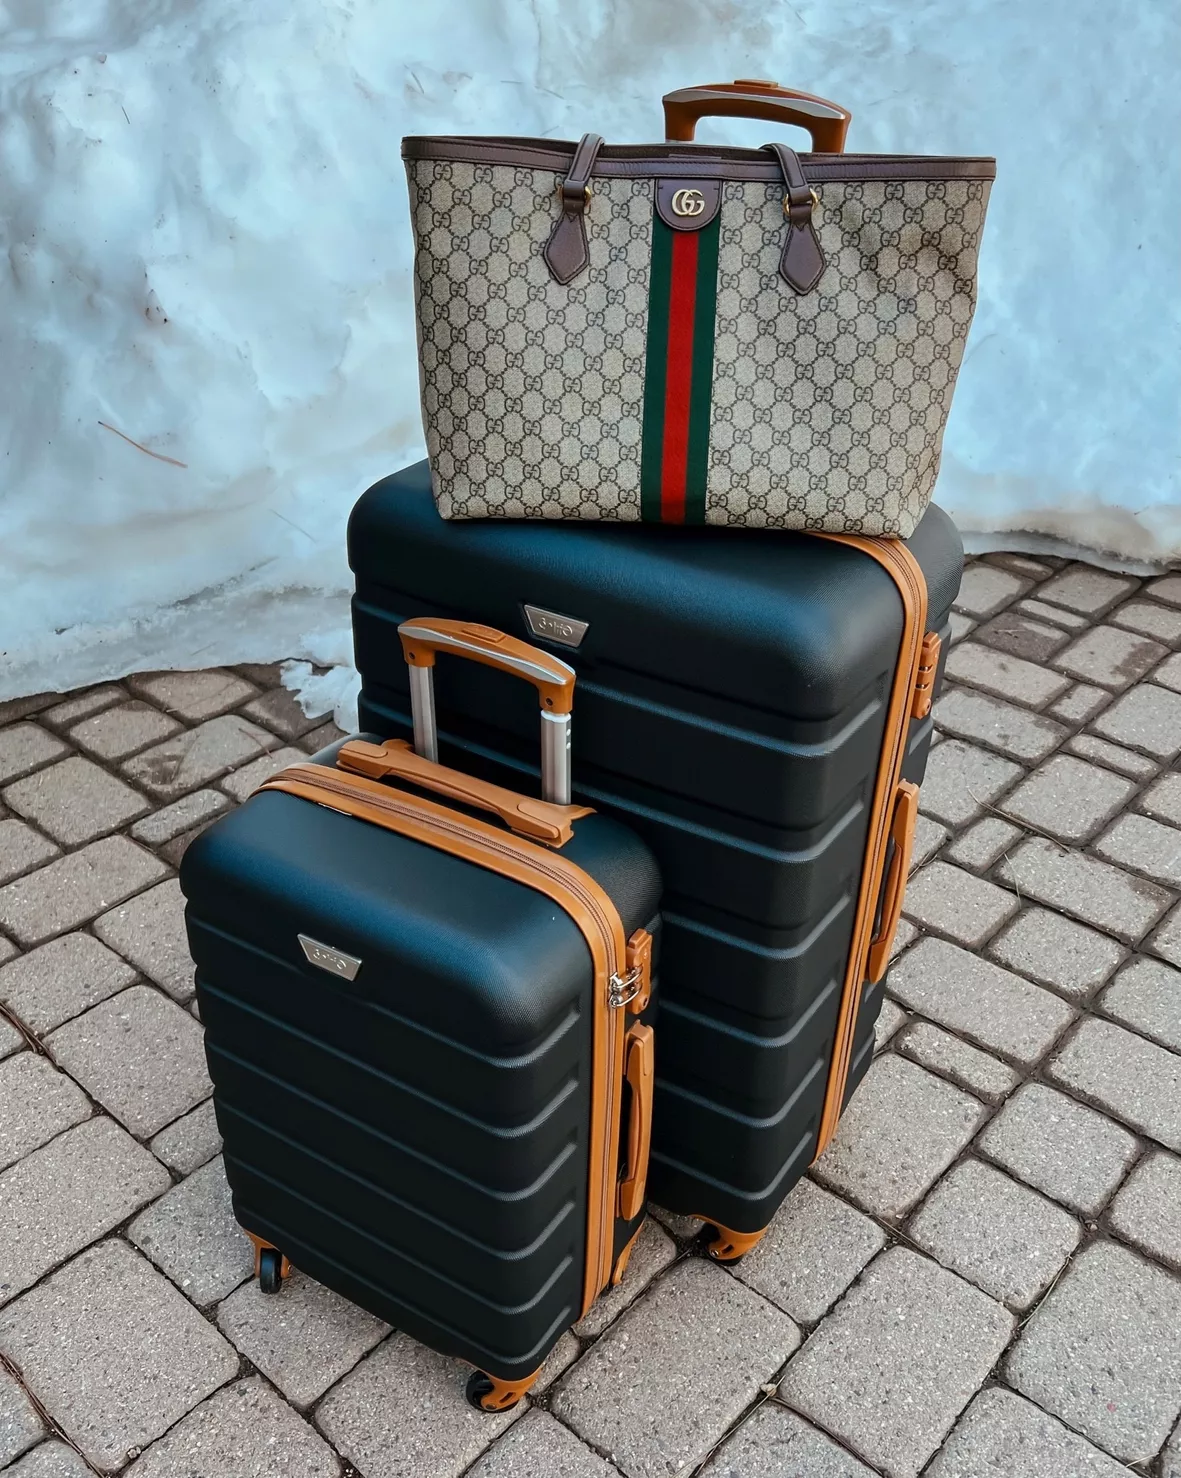 Gucci Travel Luggage for sale